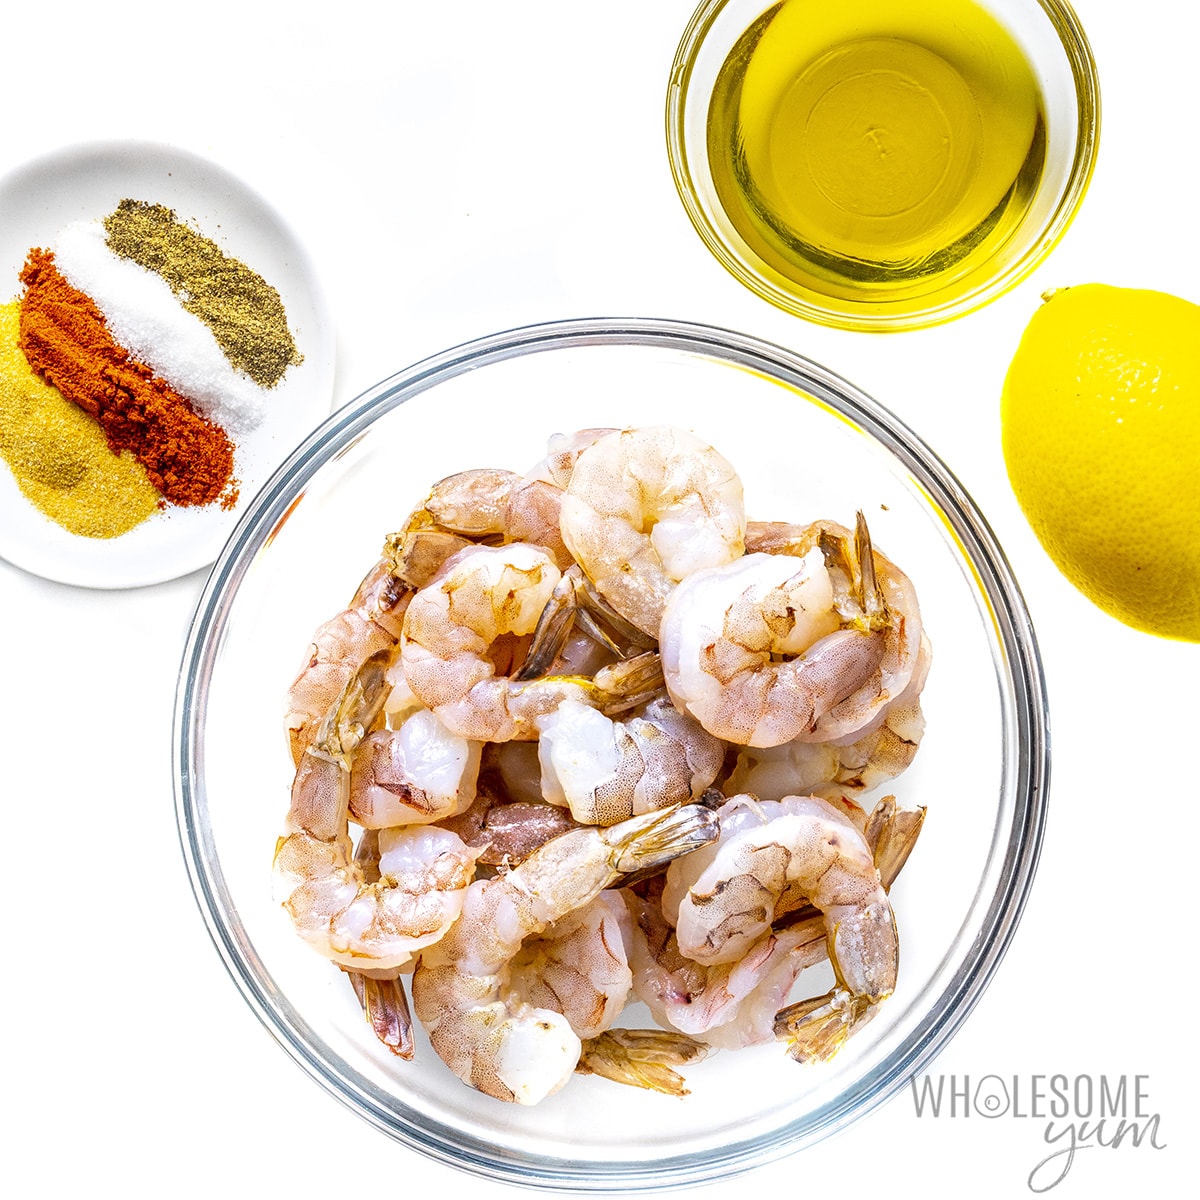 Shrimp and other ingredients in small bowls.